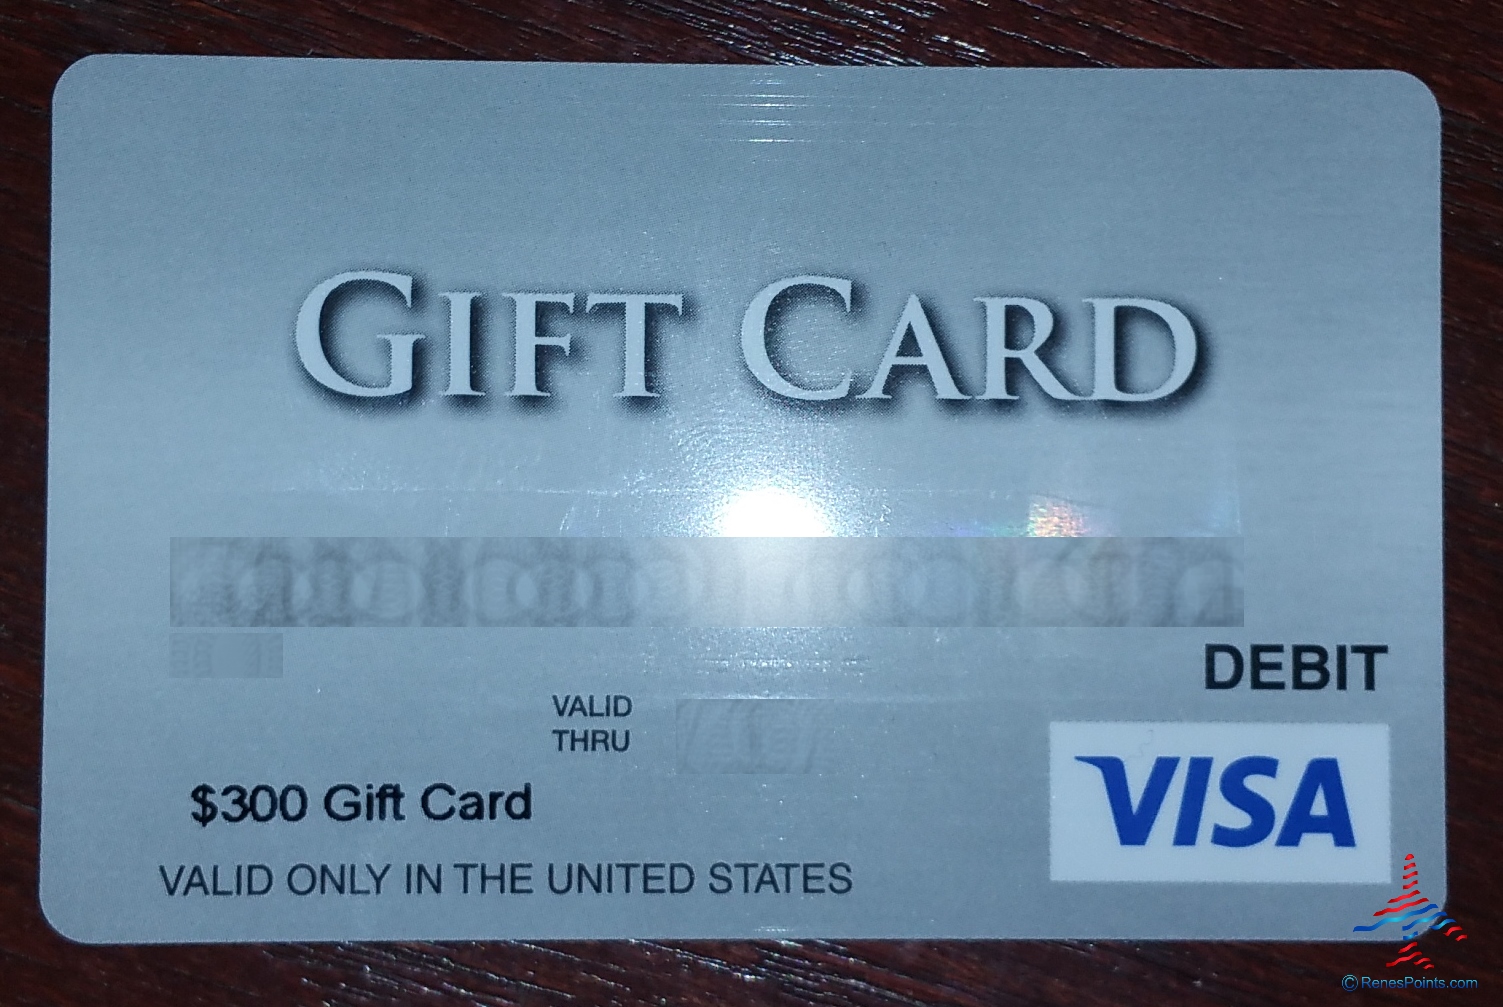 300 Visa Debit Gift Card That You Can Set A Pin Vdgc Renes Points